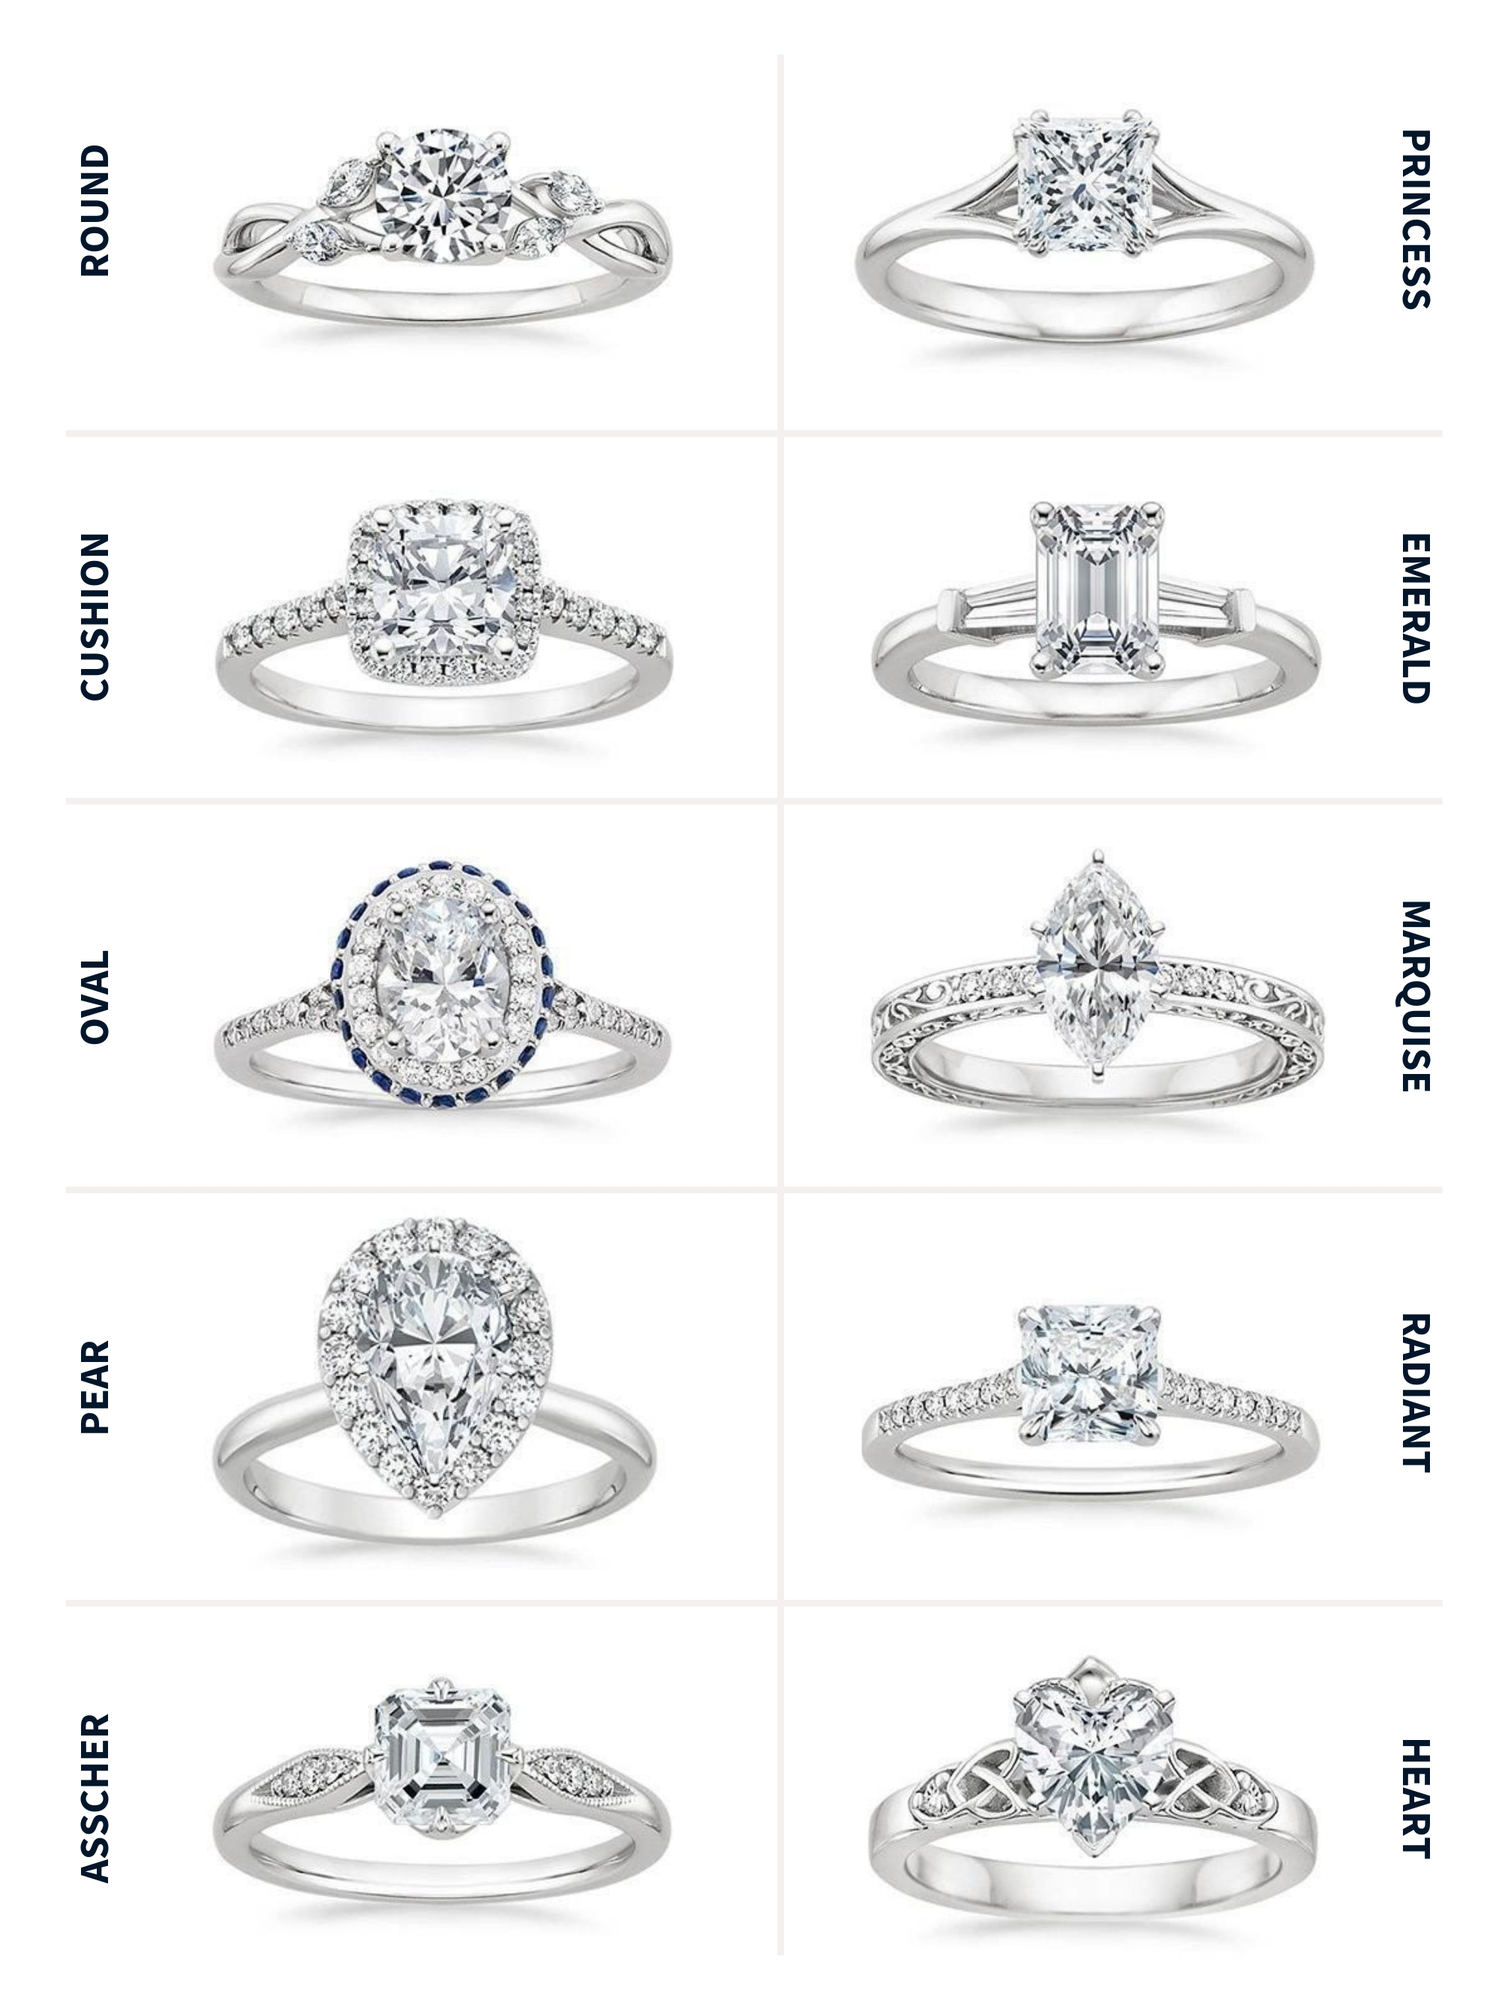 How To Buy An Engagement Ring In 2021 In Depth Guide